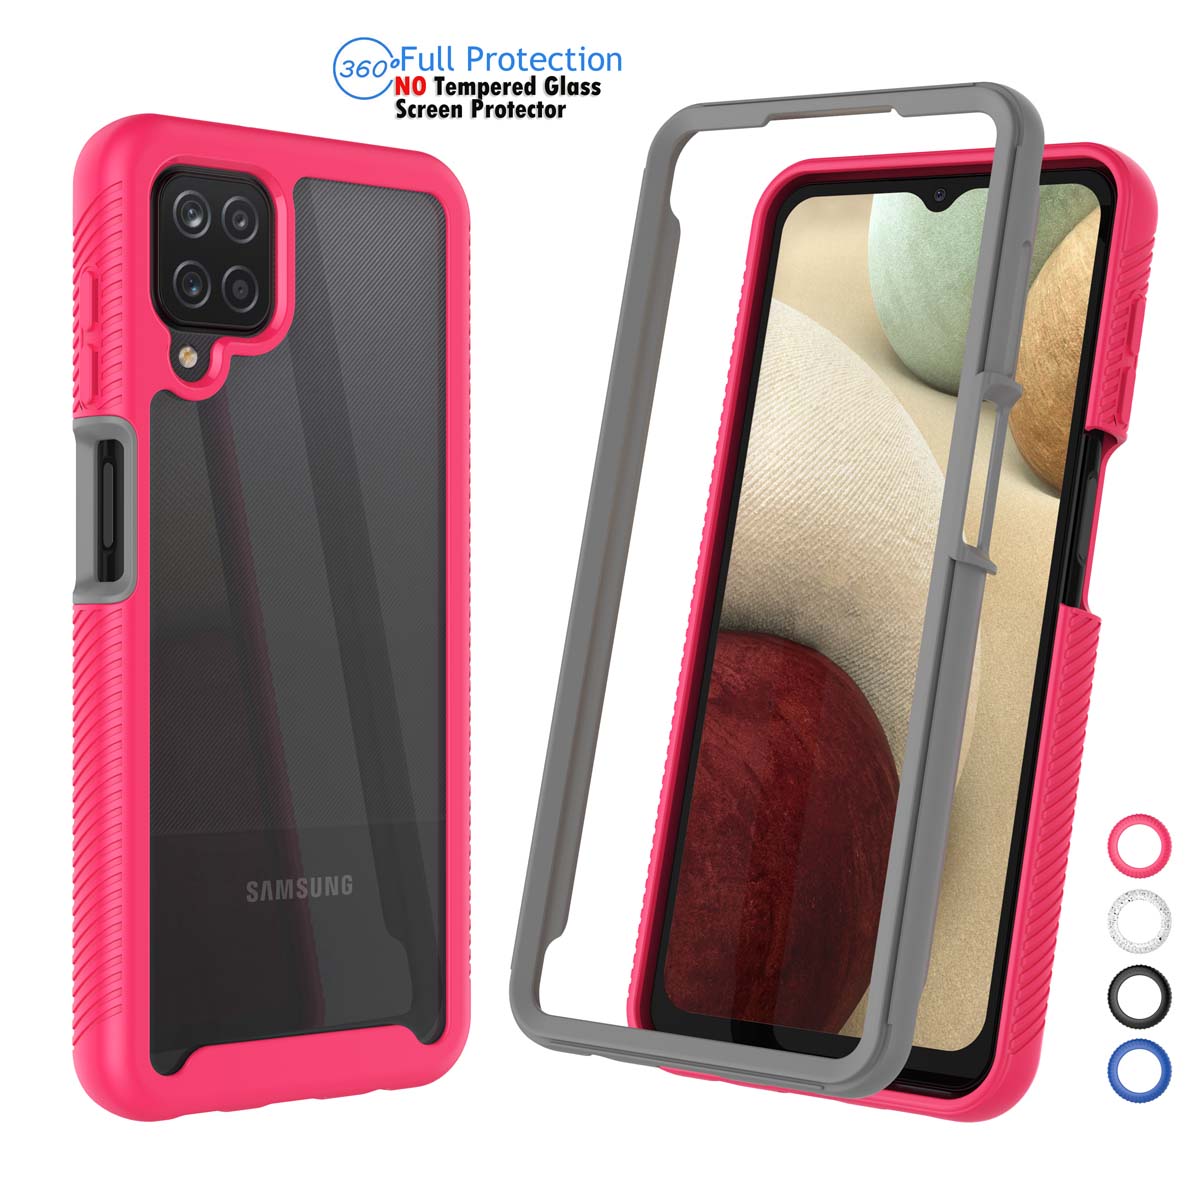 Galaxy A12 5G Case, Sturdy Case for 2021 Samsung Galaxy A12 5G, Njjex Full-Body Rugged Transparent Clear Back Bumper Case Cover for Samsung Galaxy A12 5G 6.5" 2021 -Hot Pink - image 1 of 10